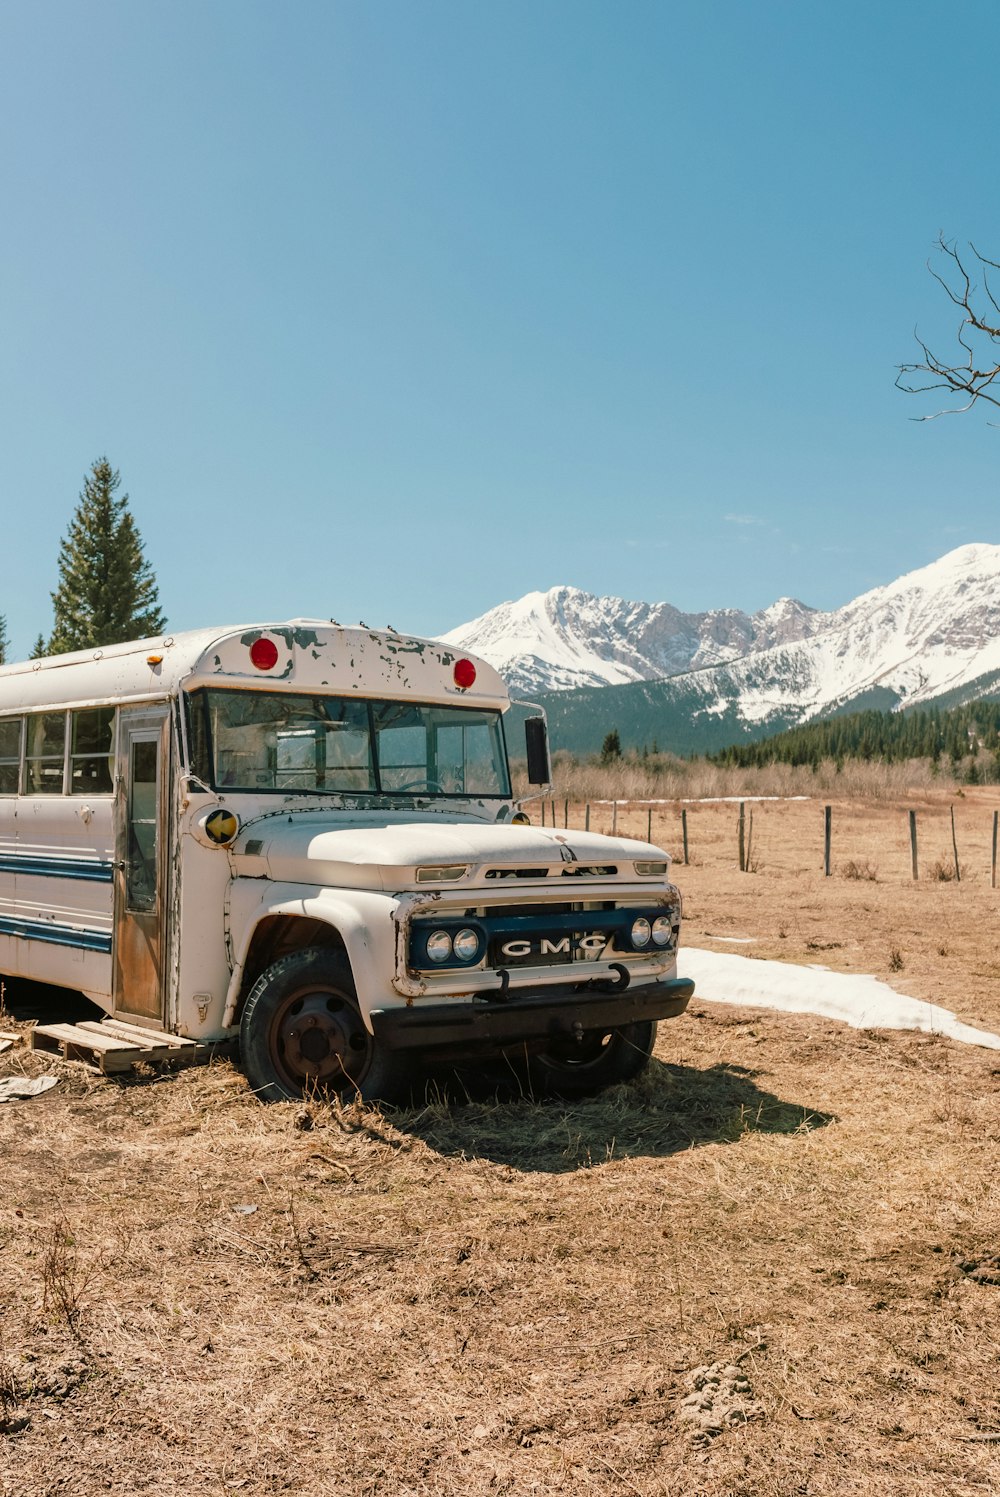 a school bus parked in a field with mountains in the background